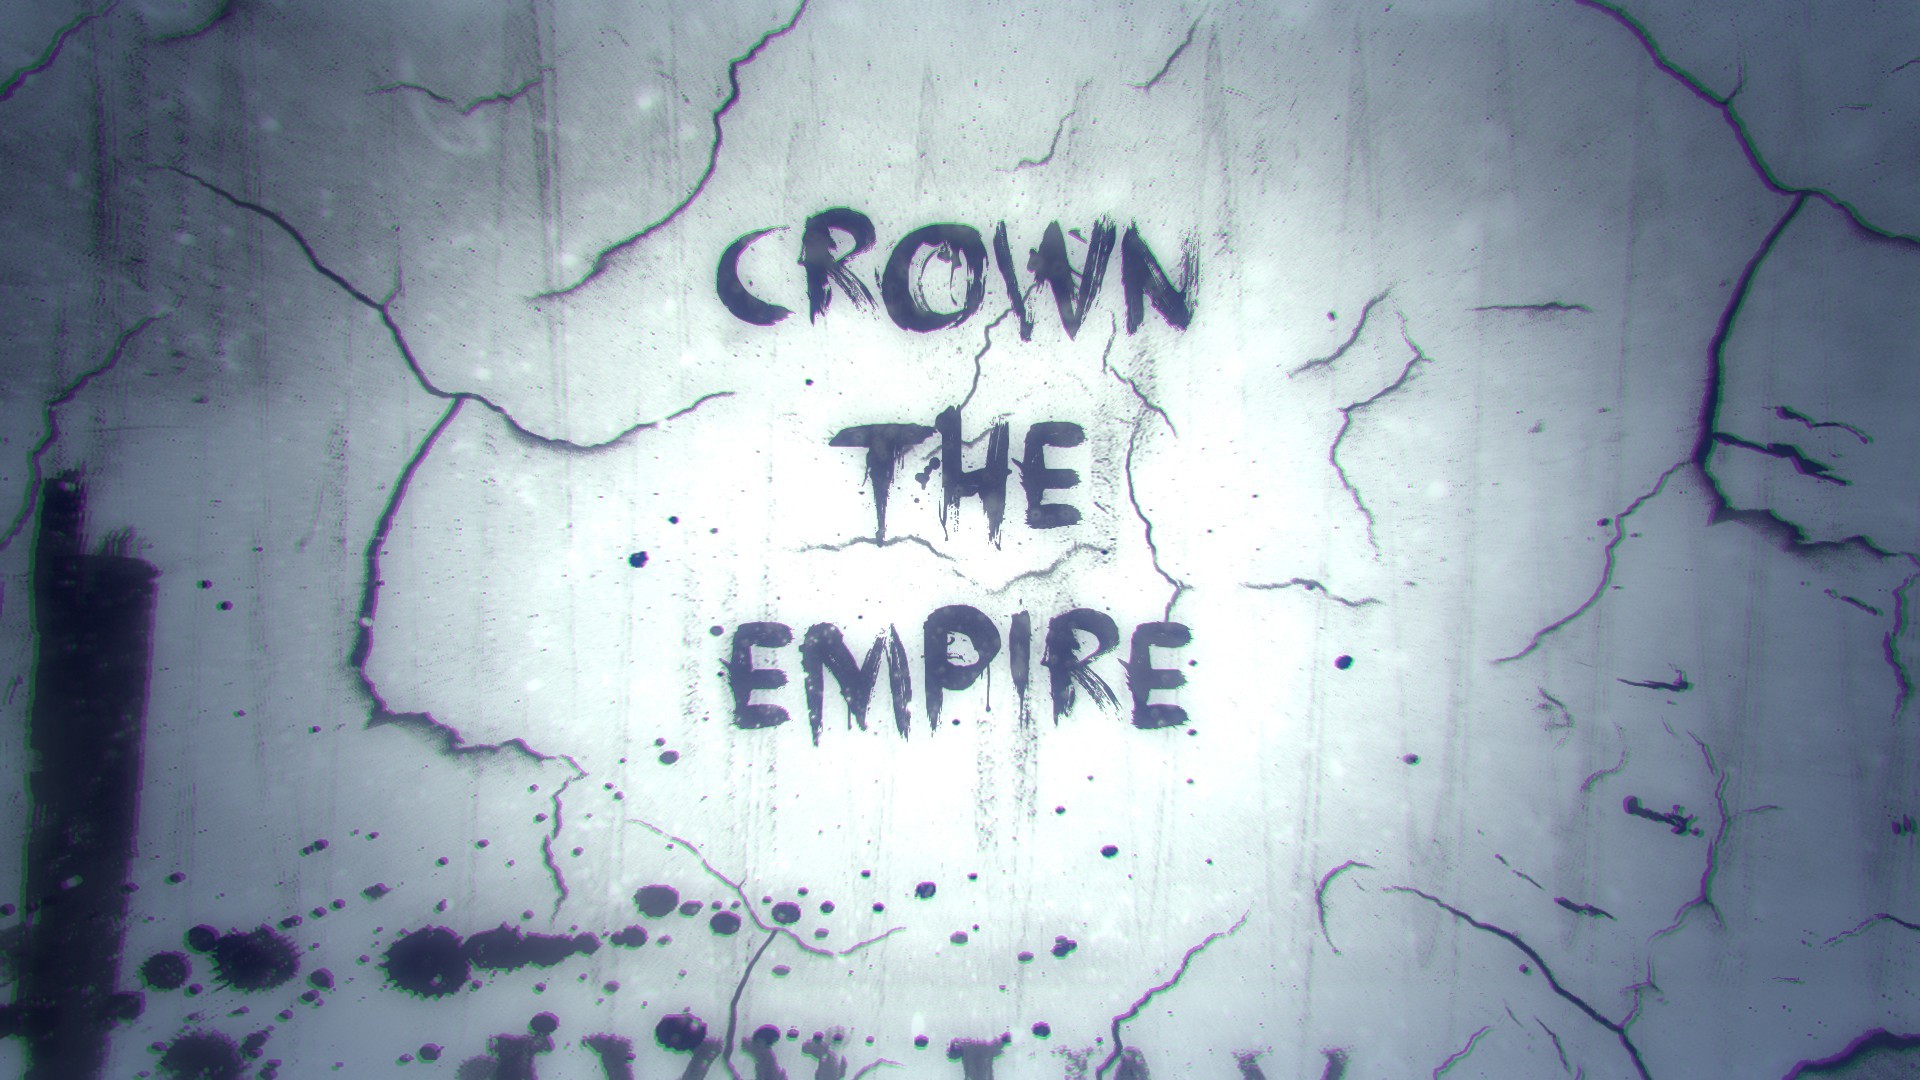 Crown The Empire Typography Texture 1920x1080